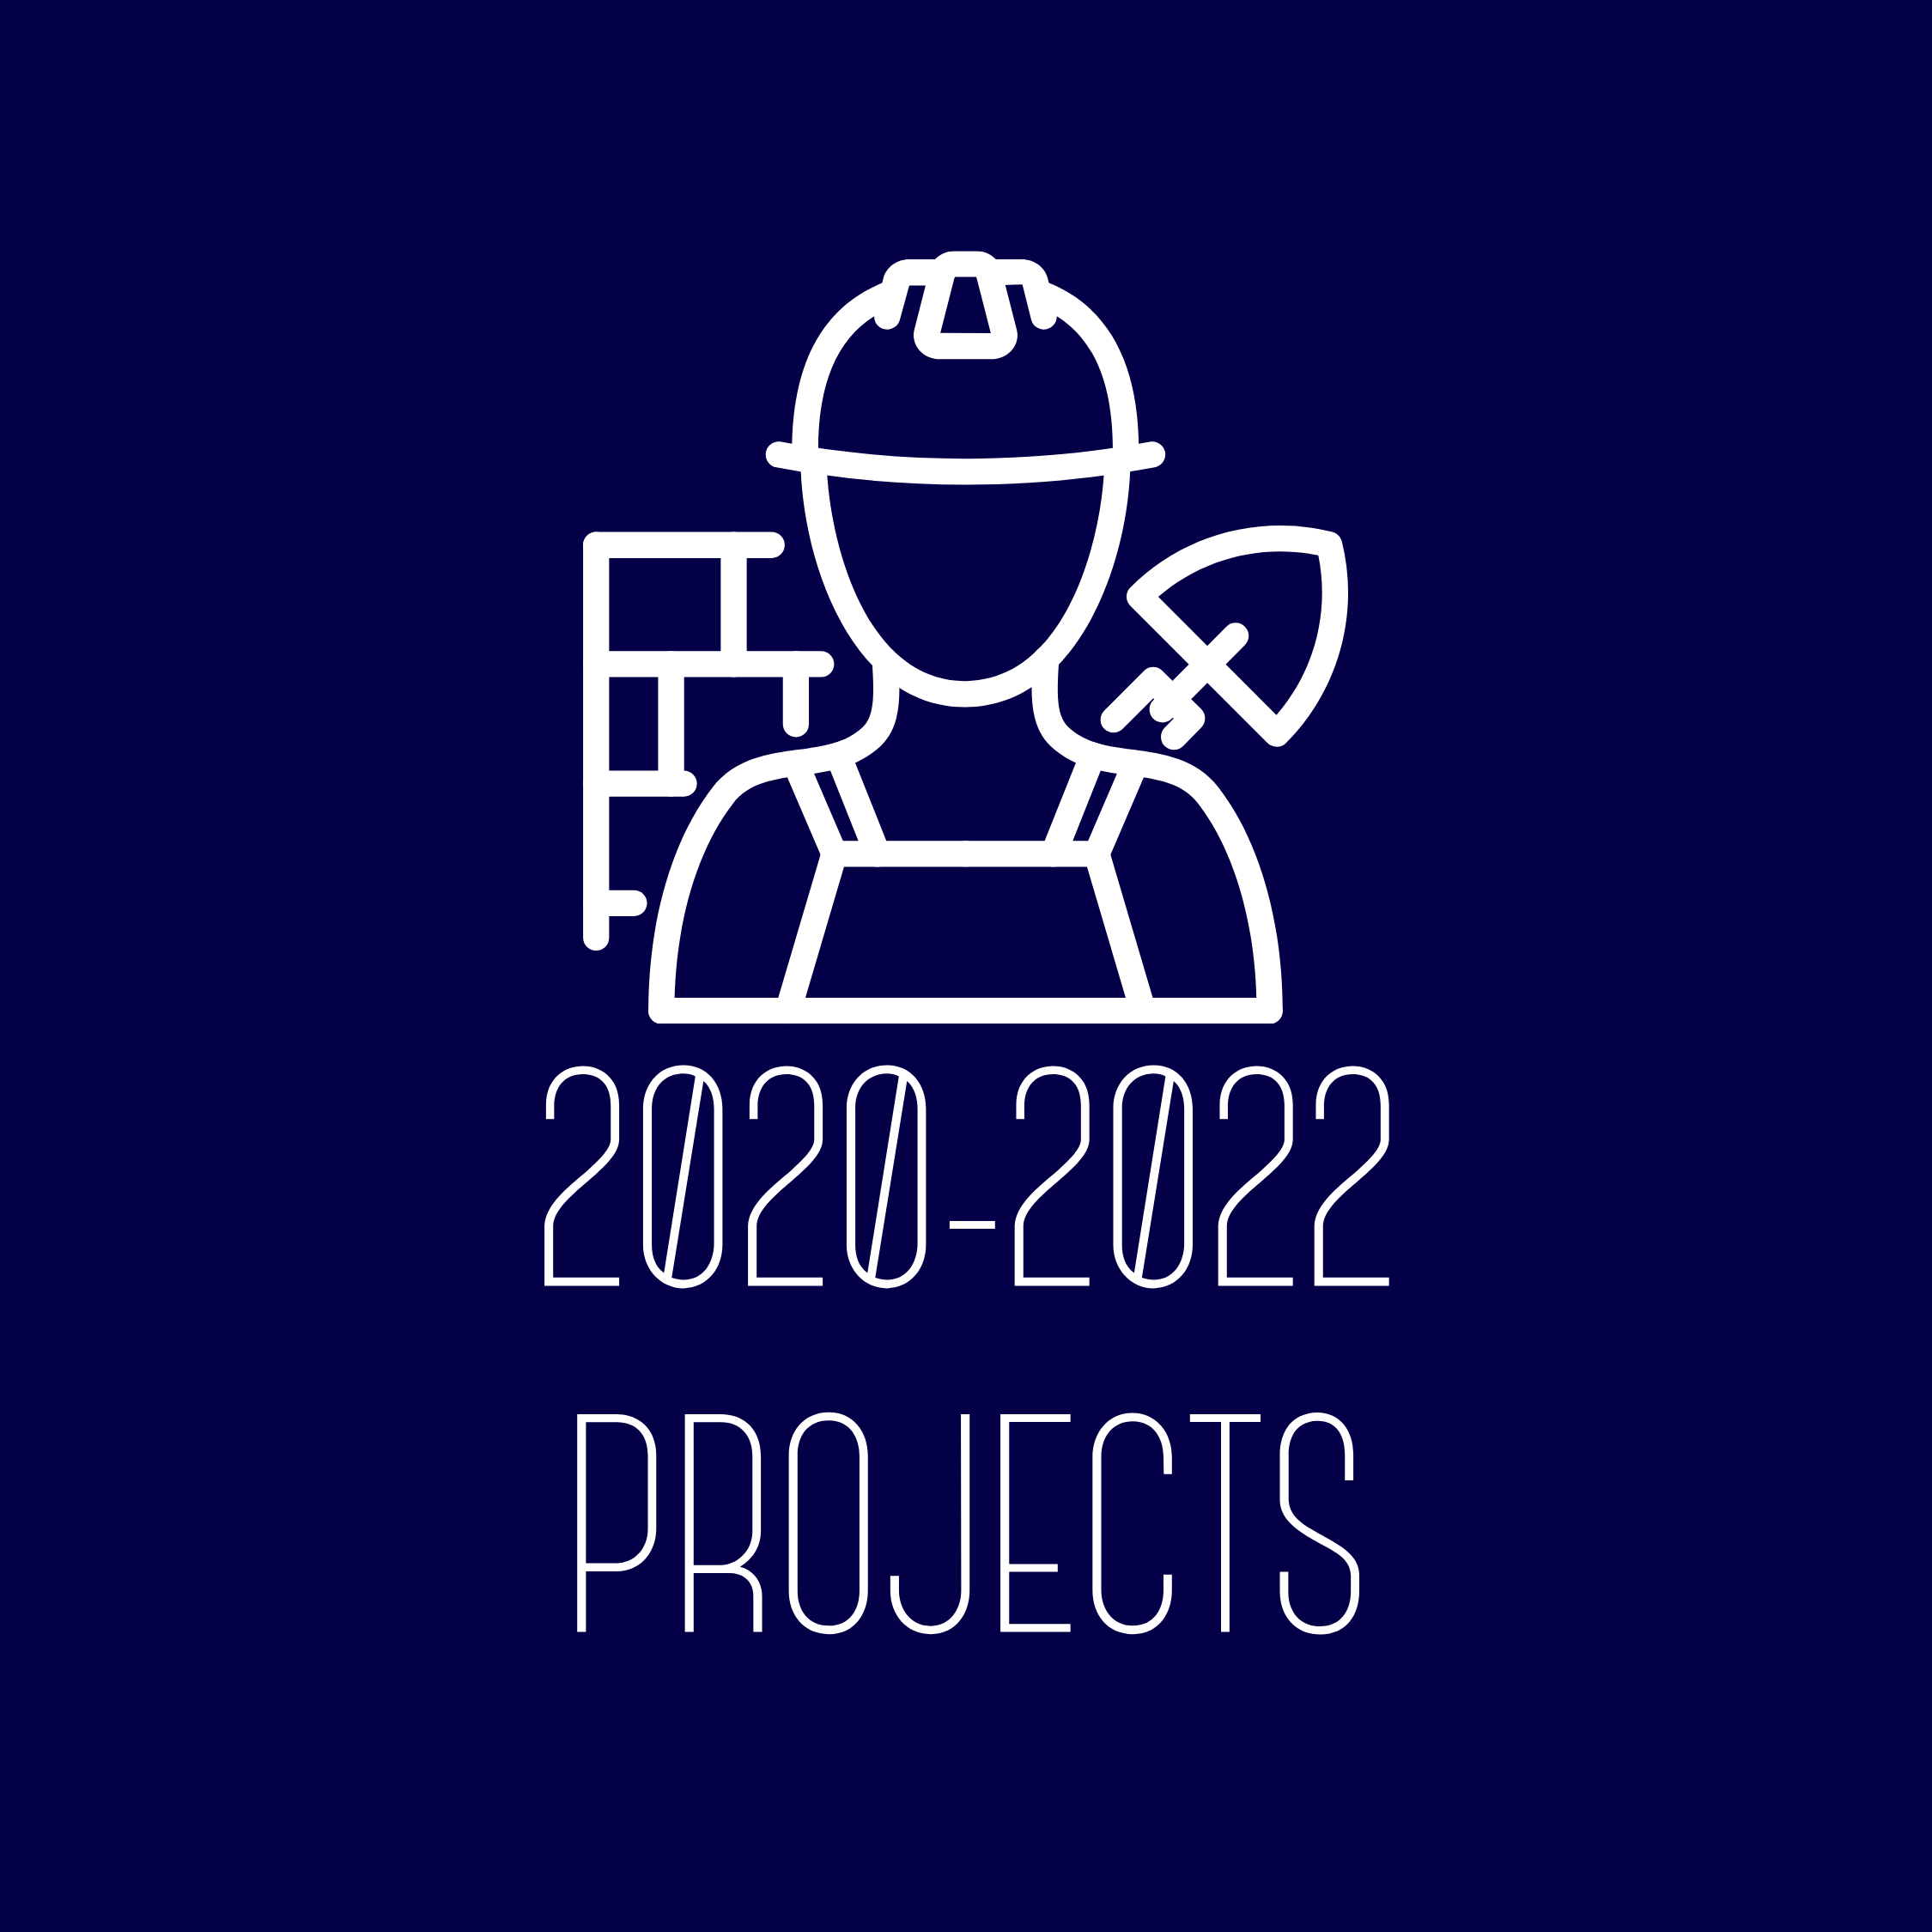 2020-2022 Projects